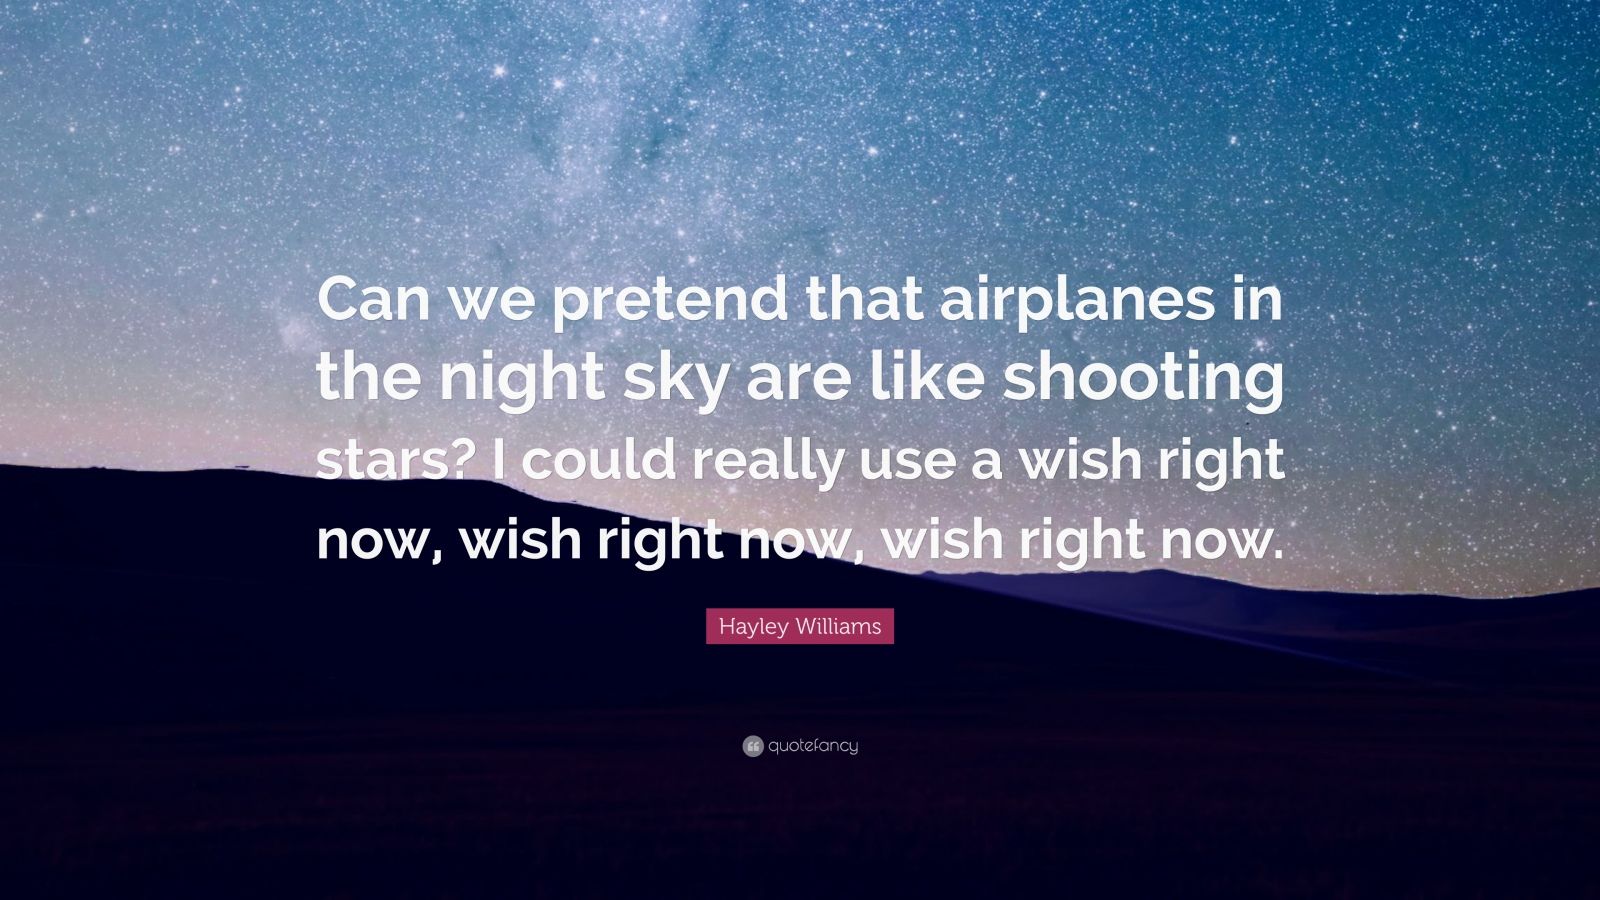 We night sky pretend in that airplanes the can Lyrics to